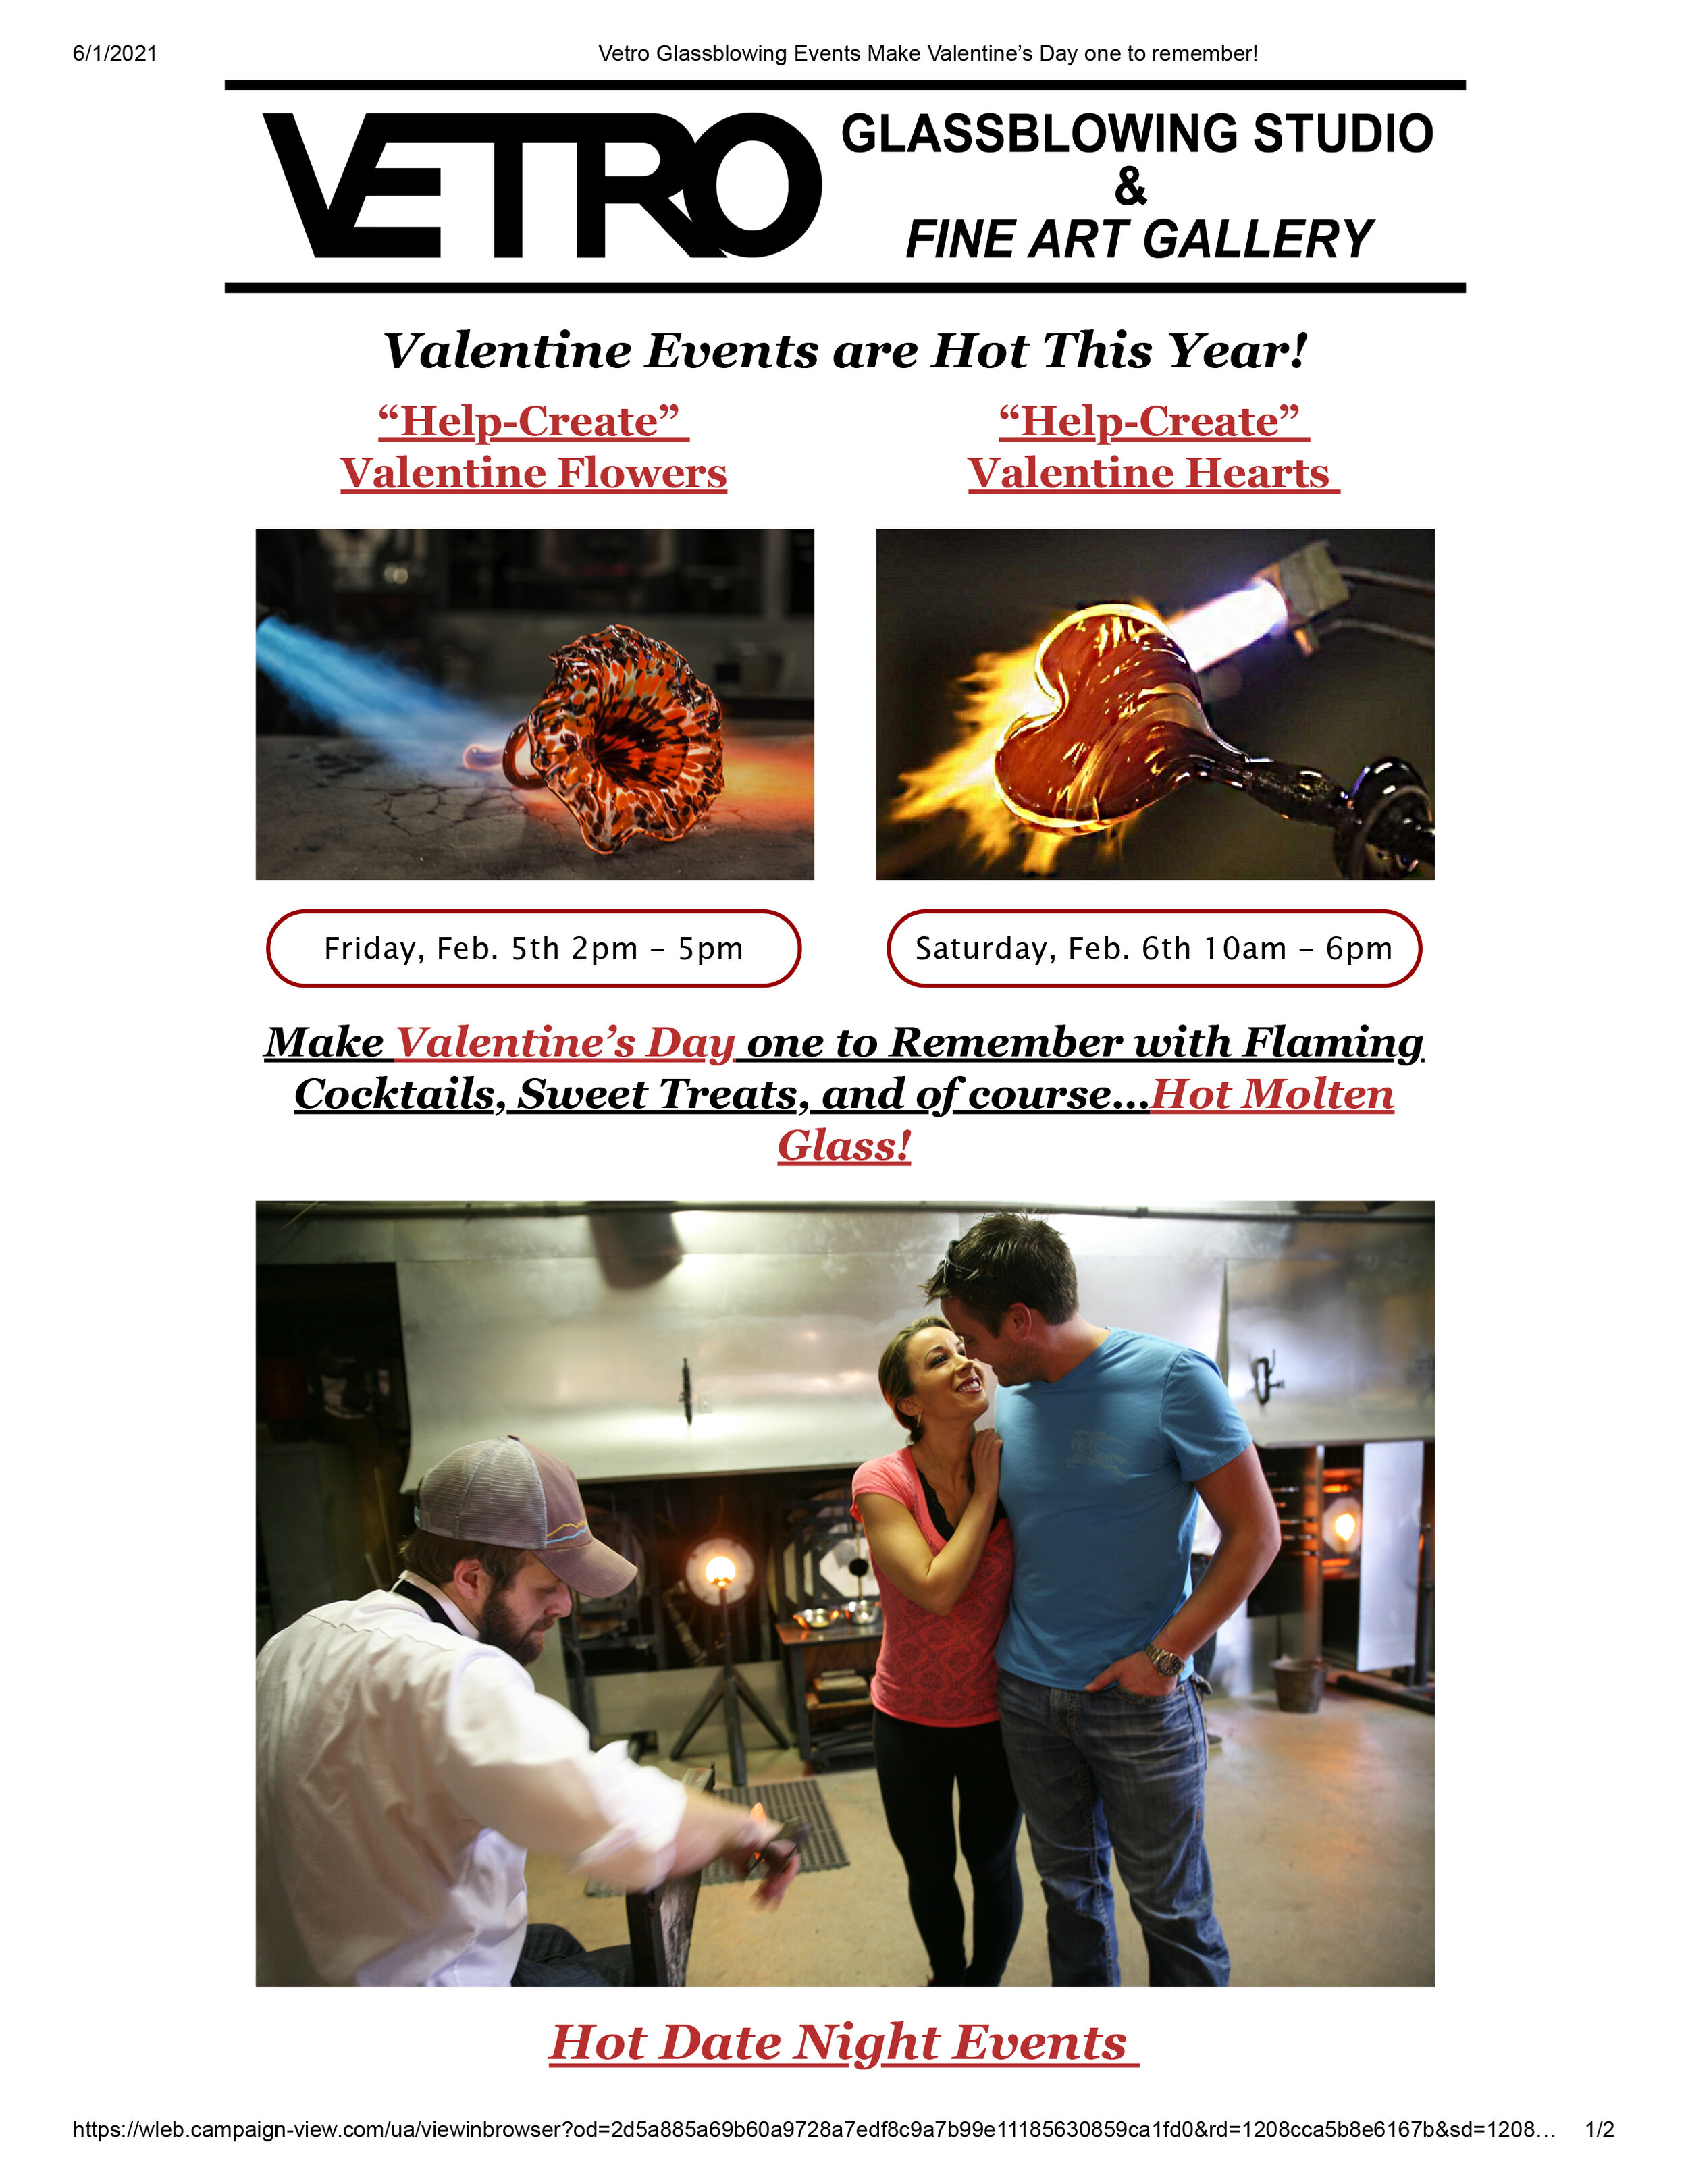 Email Campaigns -Vetro Glassblowing Studio - Valentine Events are Hot This Year!-1.jpg